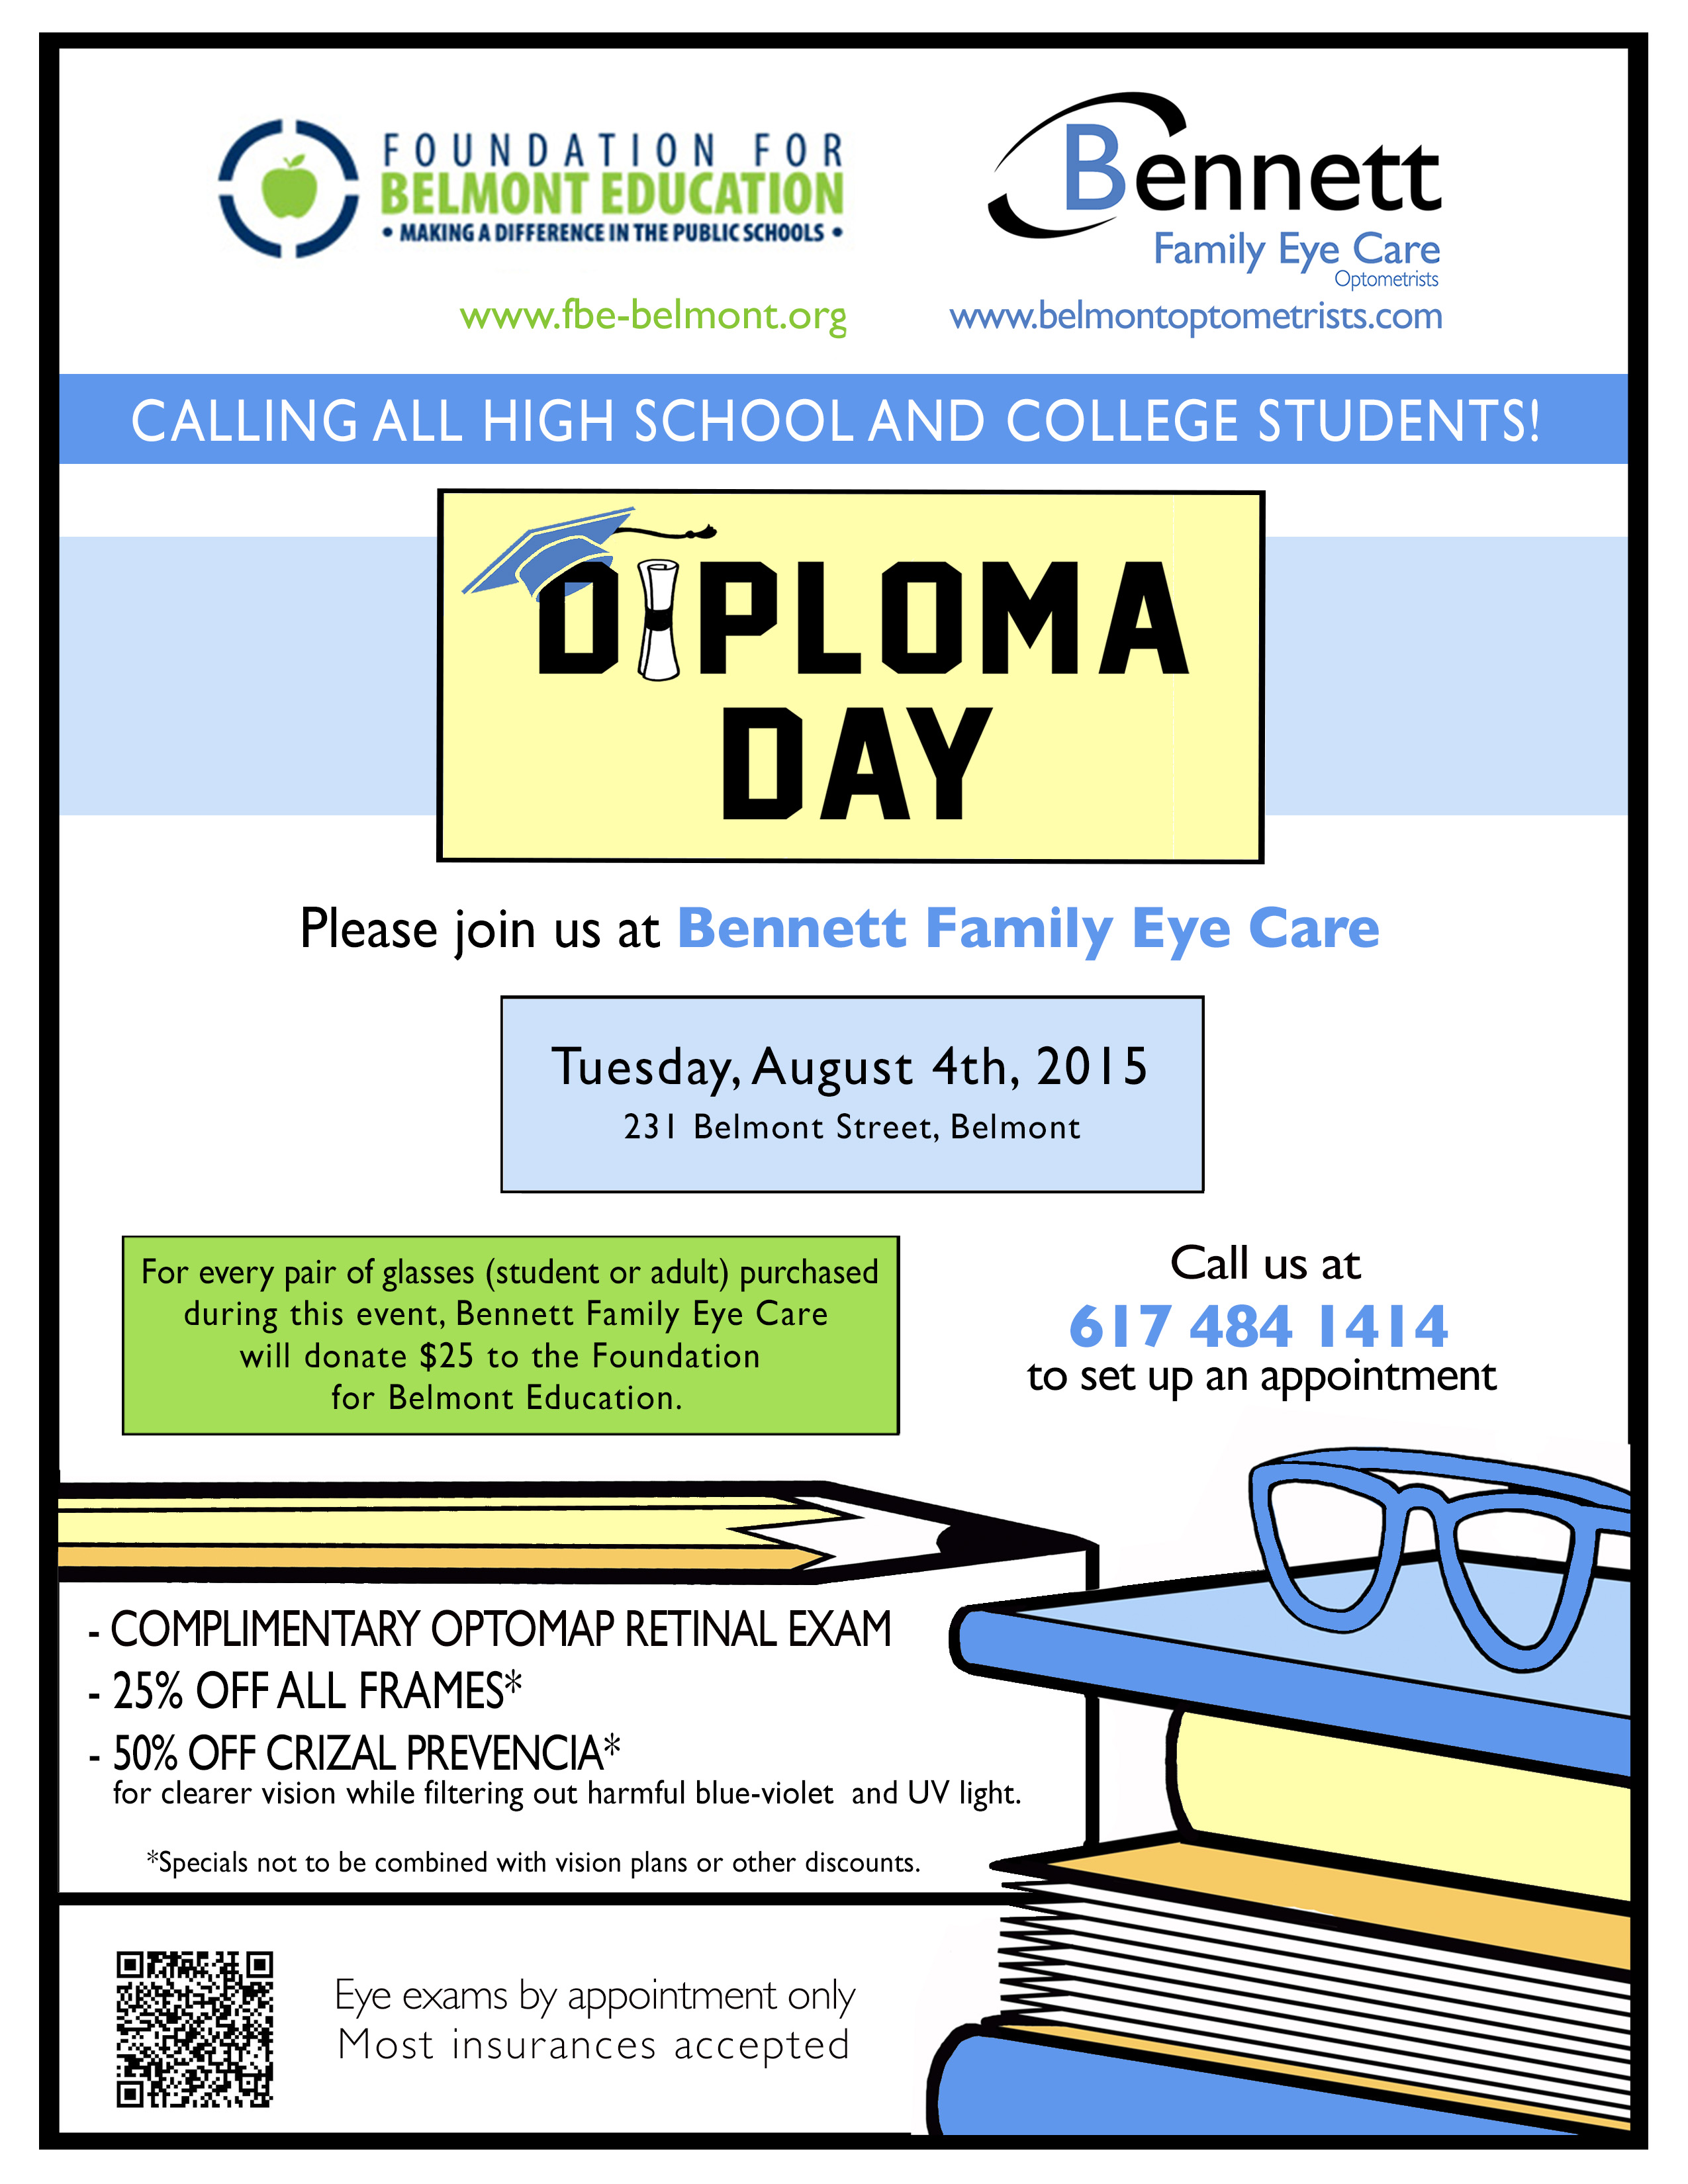 Book your high school or college student’s Diploma Day appointment at Bennett Family Eye Care and support the FBE